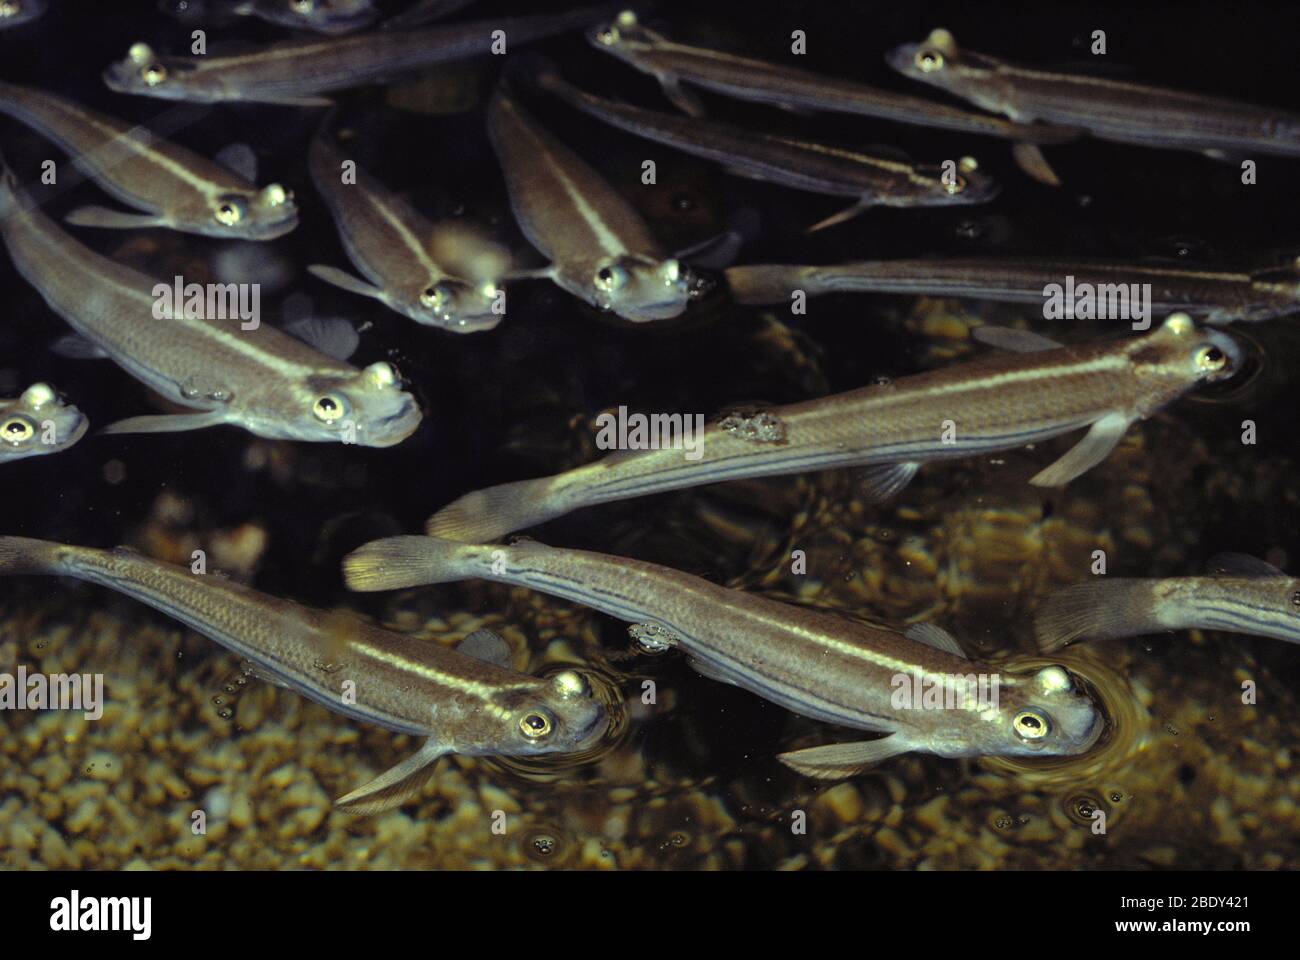 Pacific Four-eyed Fish (Anableps dowei) Stock Photo